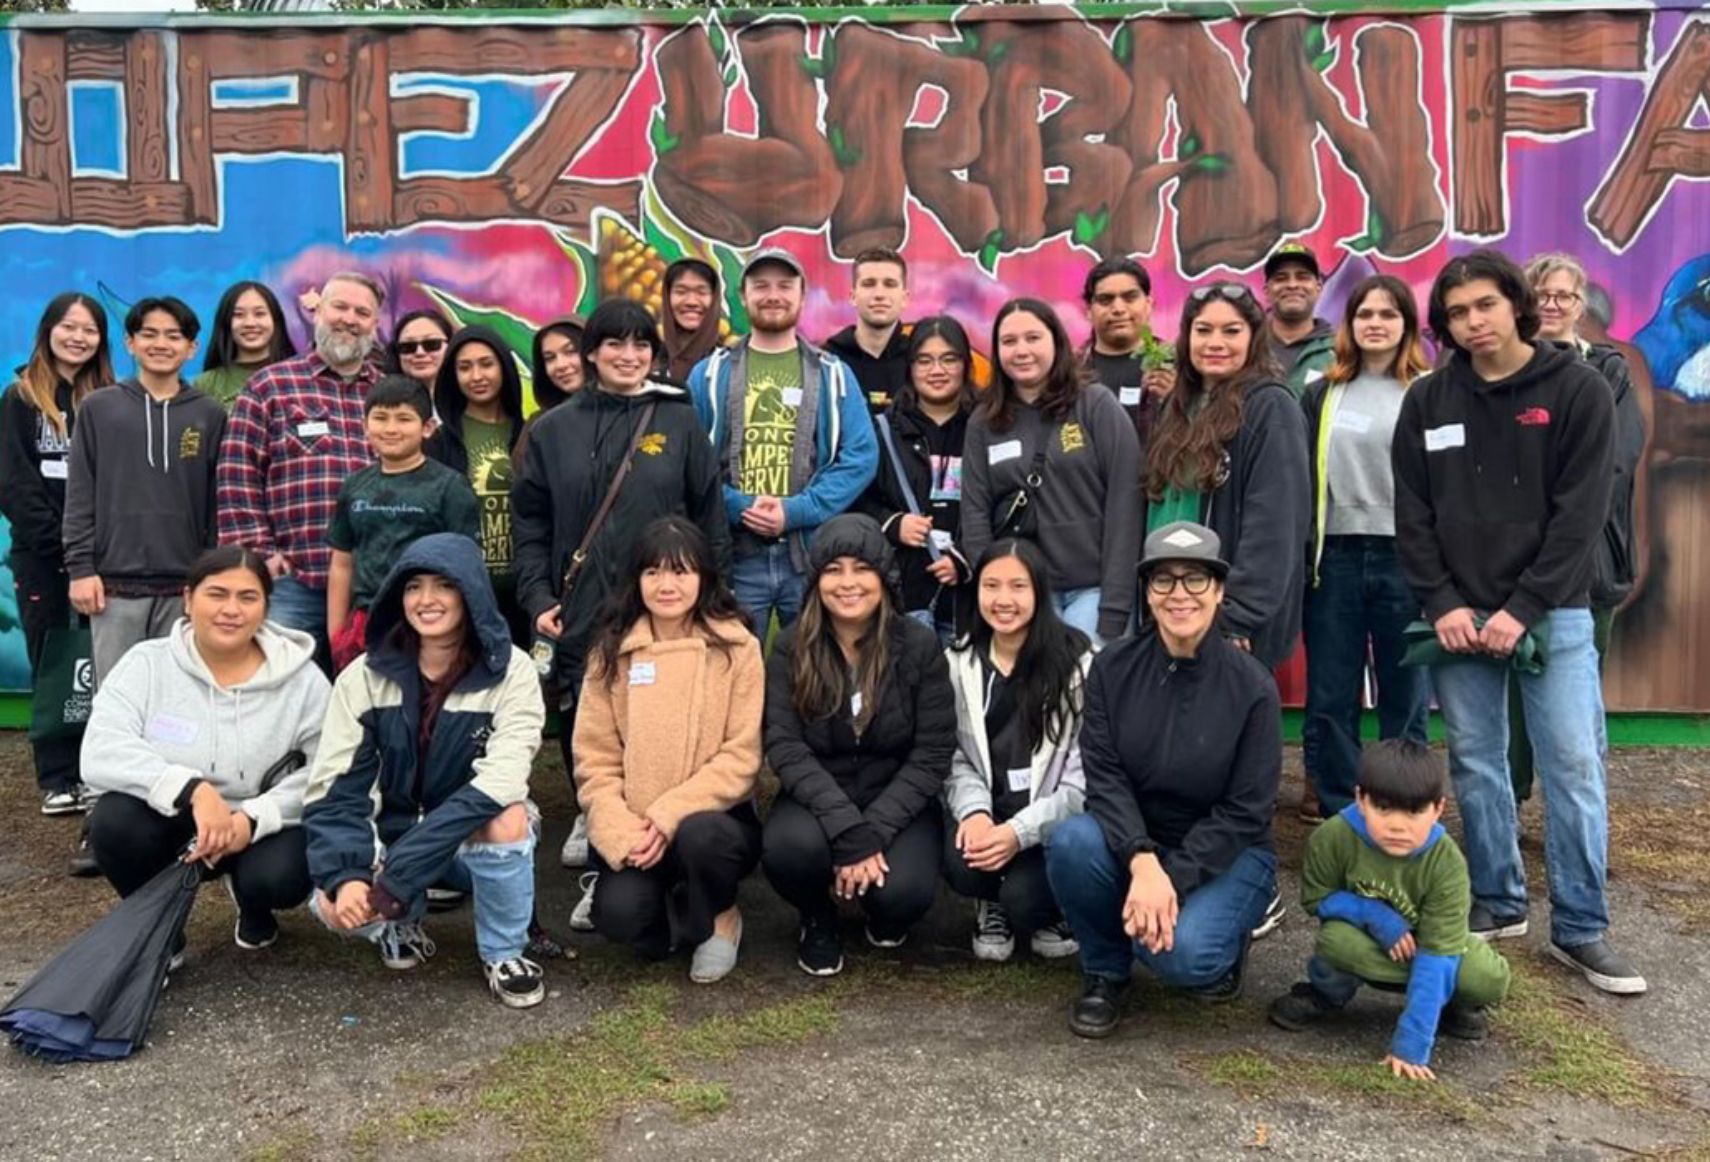 "A diverse group of individuals poses for a group photo in front of a mural that reads 'Urban Farm' during an outdoor event."